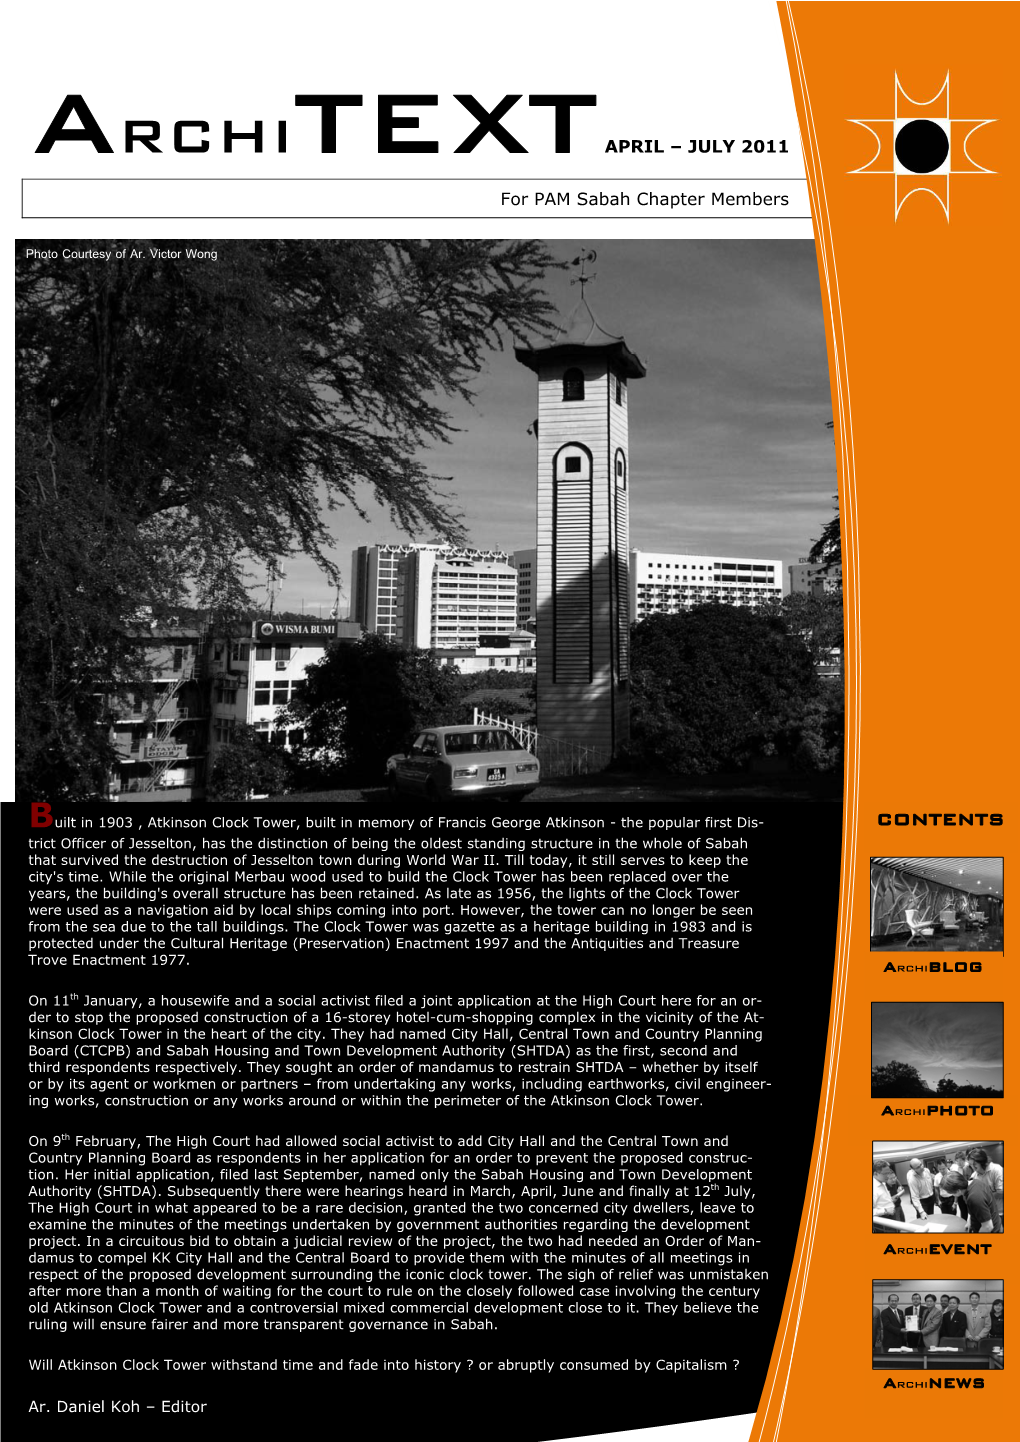 ARCHITEXT APRIL – JULY 2011 for PAM Sabah Chapter Members